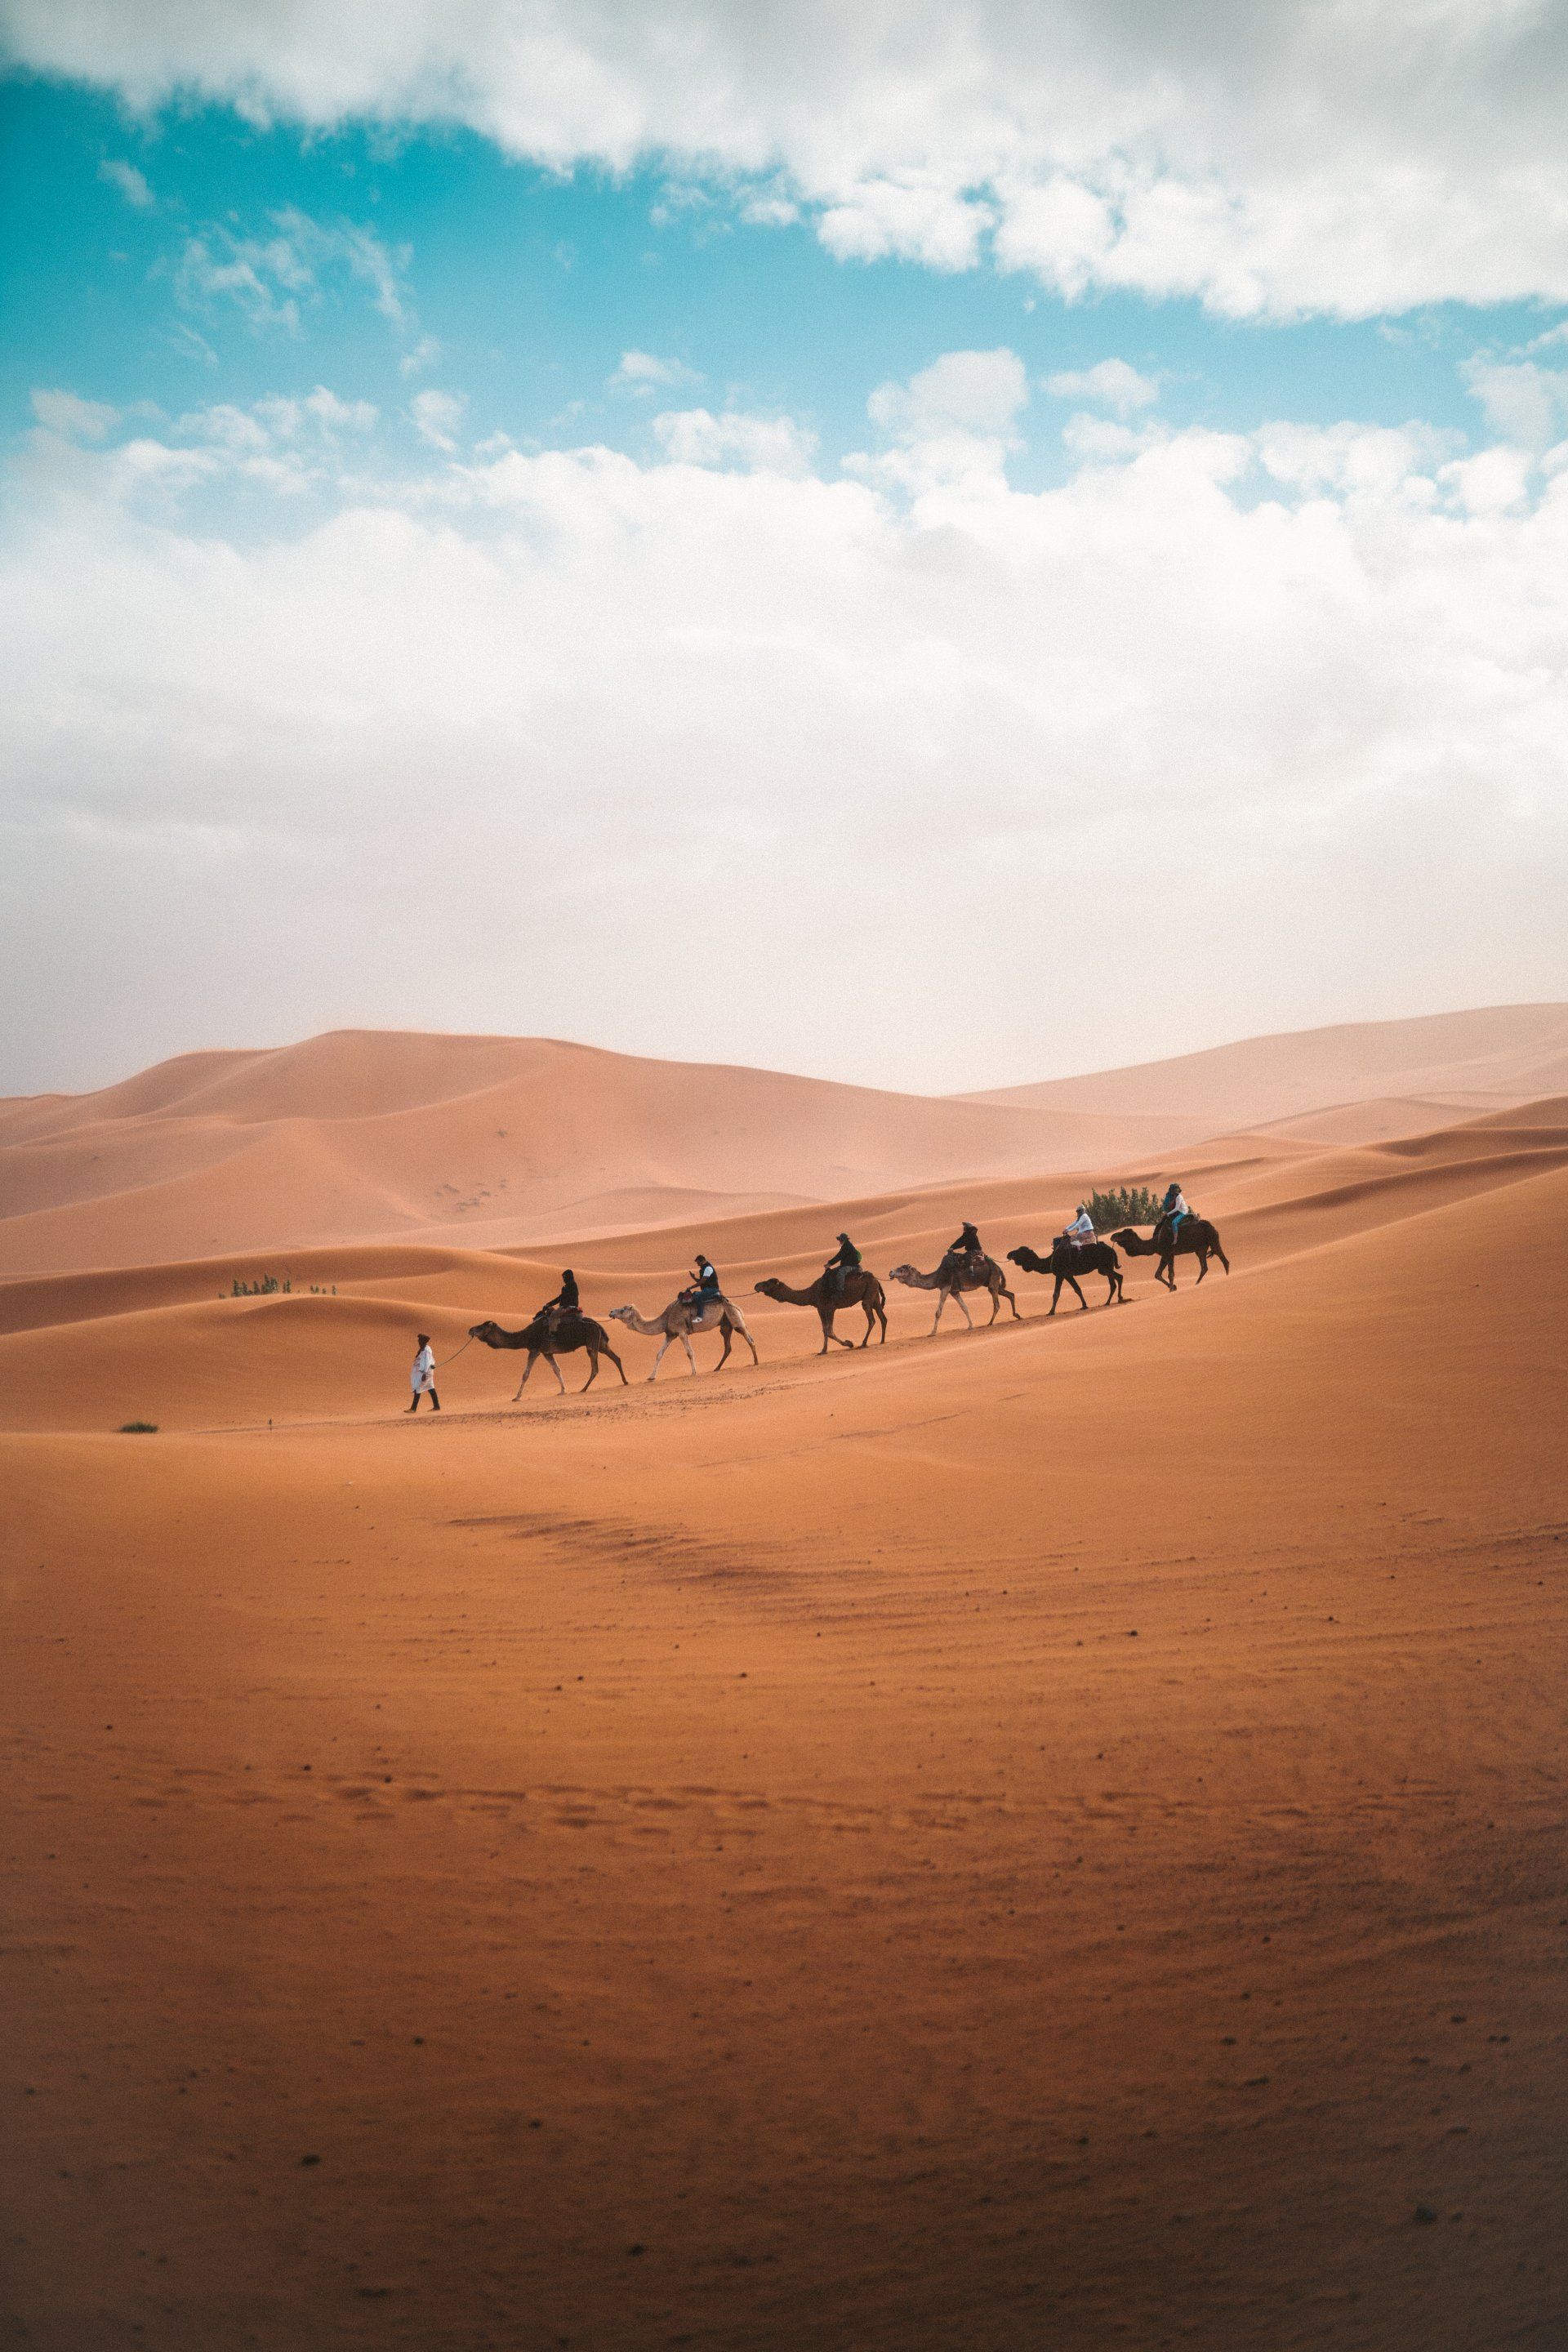 A Group of People Crossing The Sahara Desert, Mounting Camels, North Africa - Egypt Holidays Barter's Travelnet